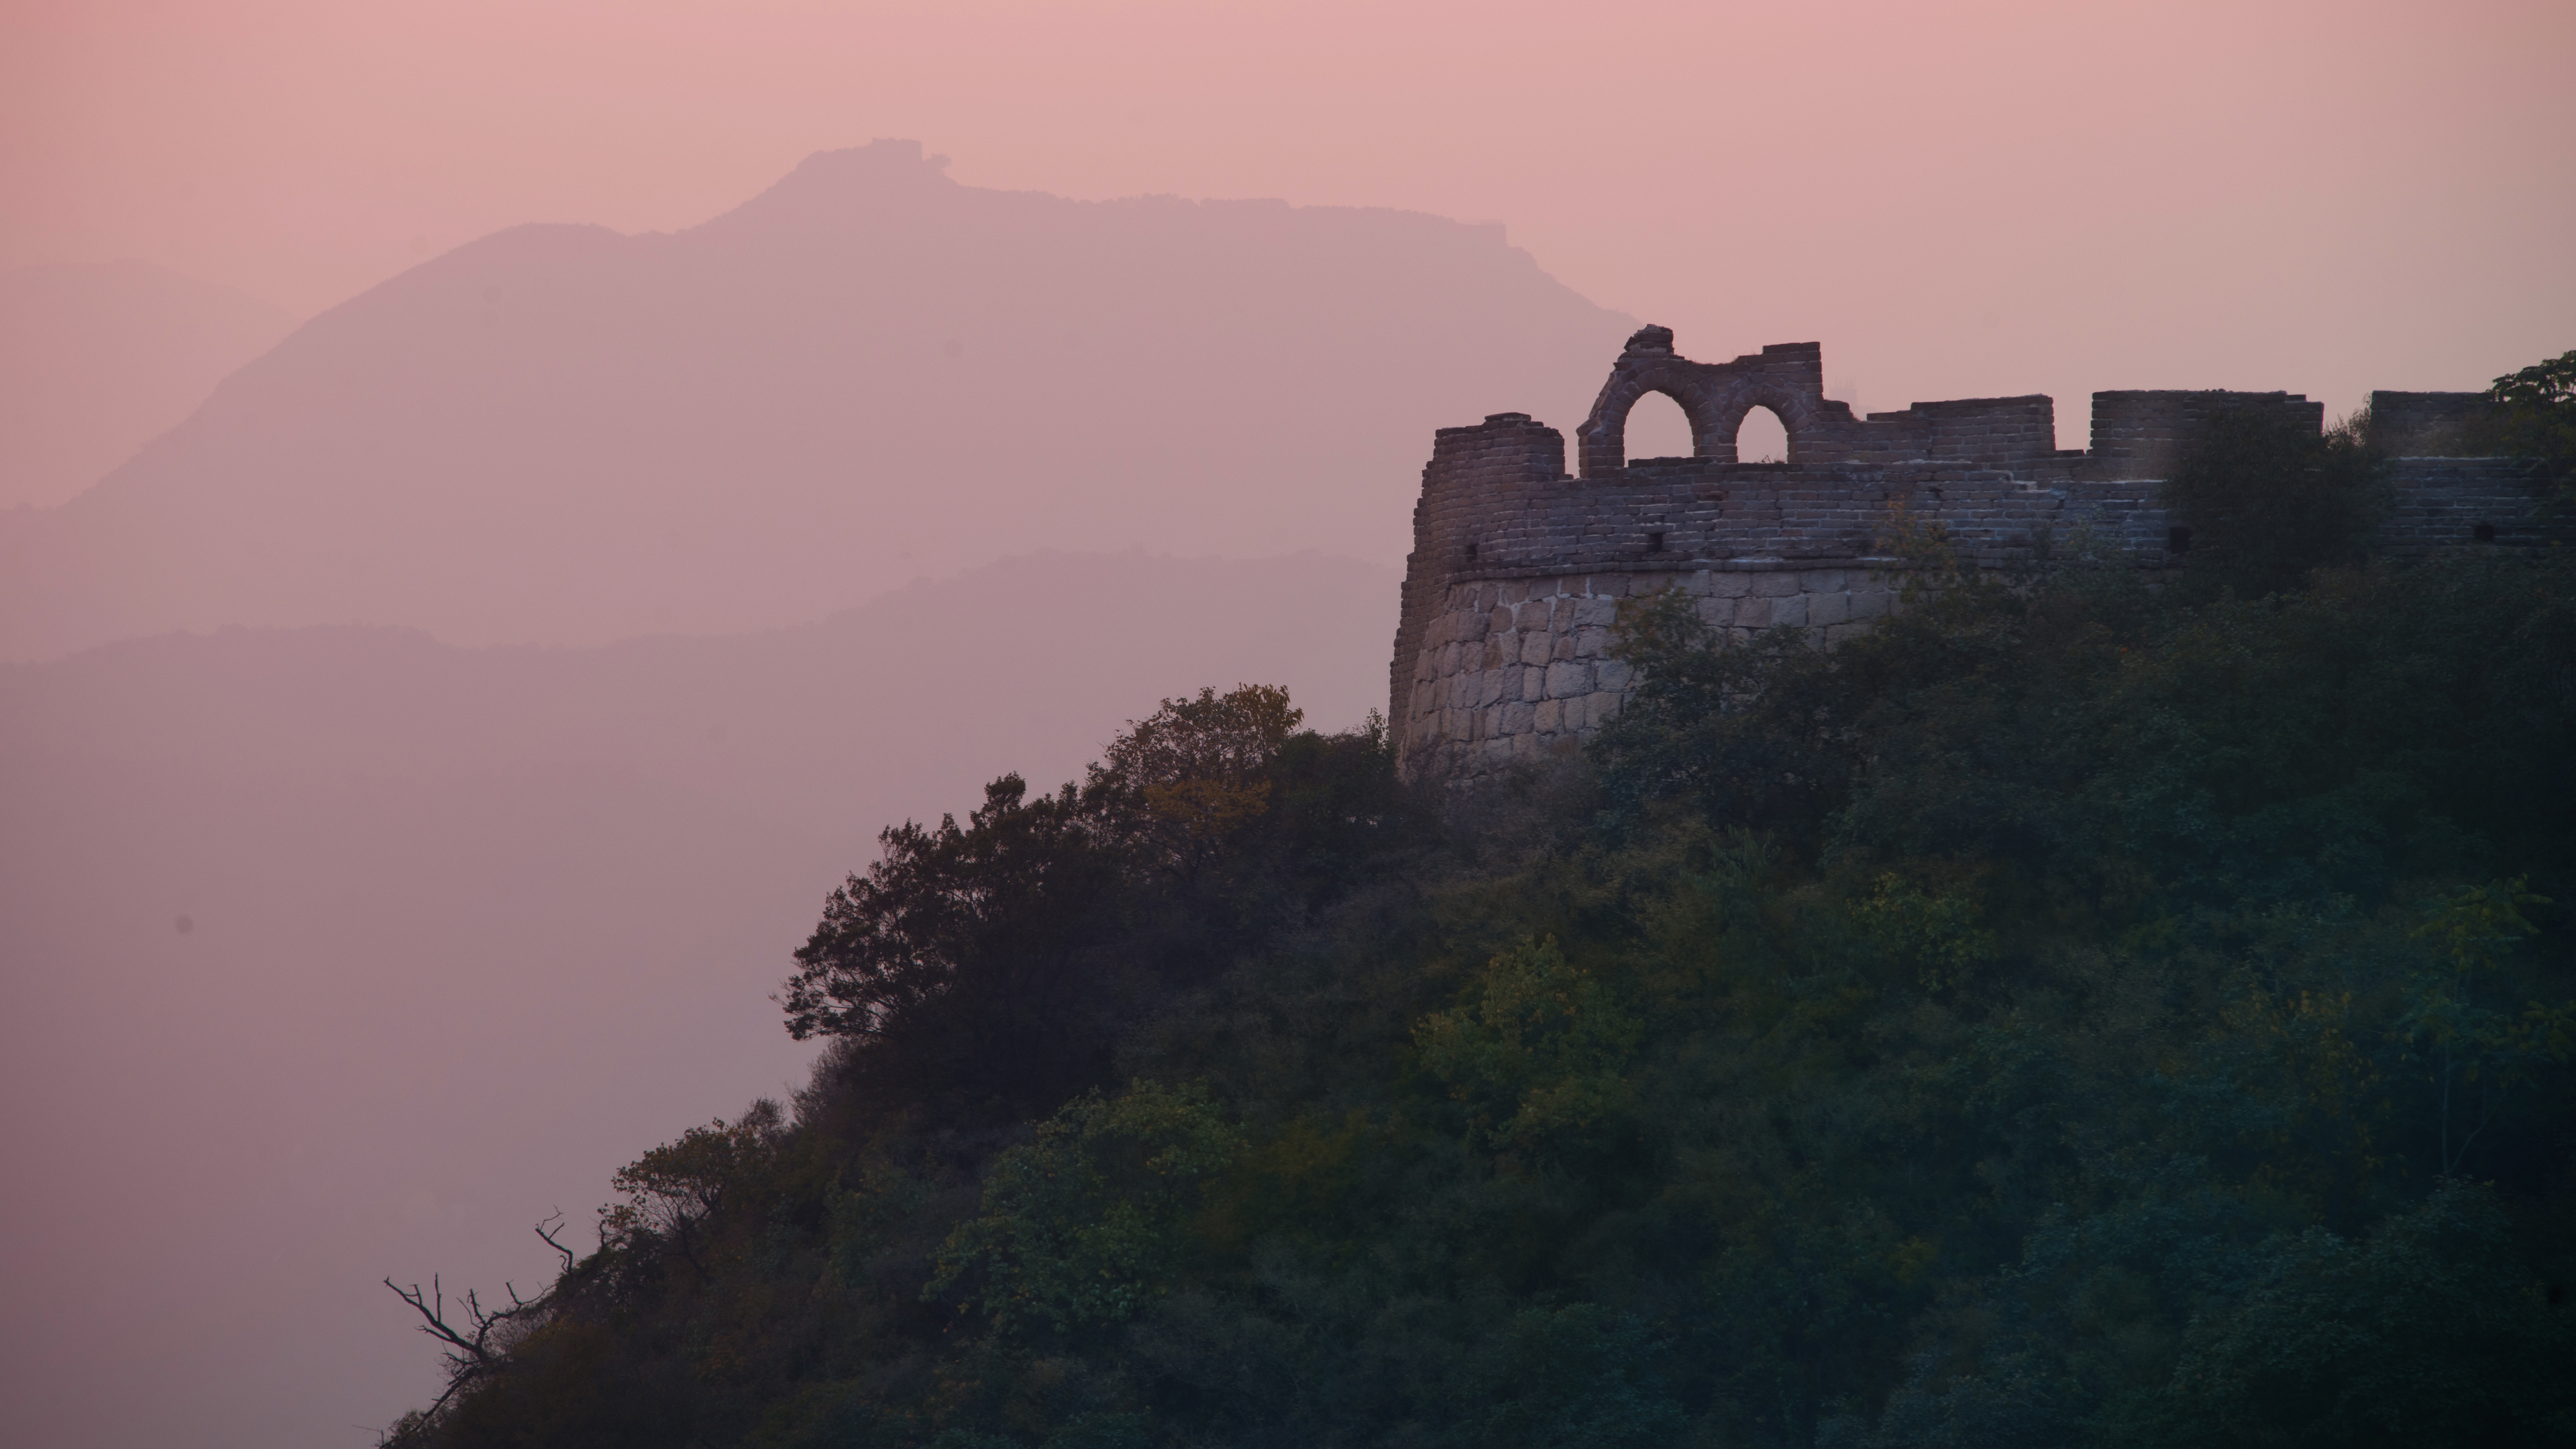 General 3840x2160 landscape 4K Great Wall of China ruins hills